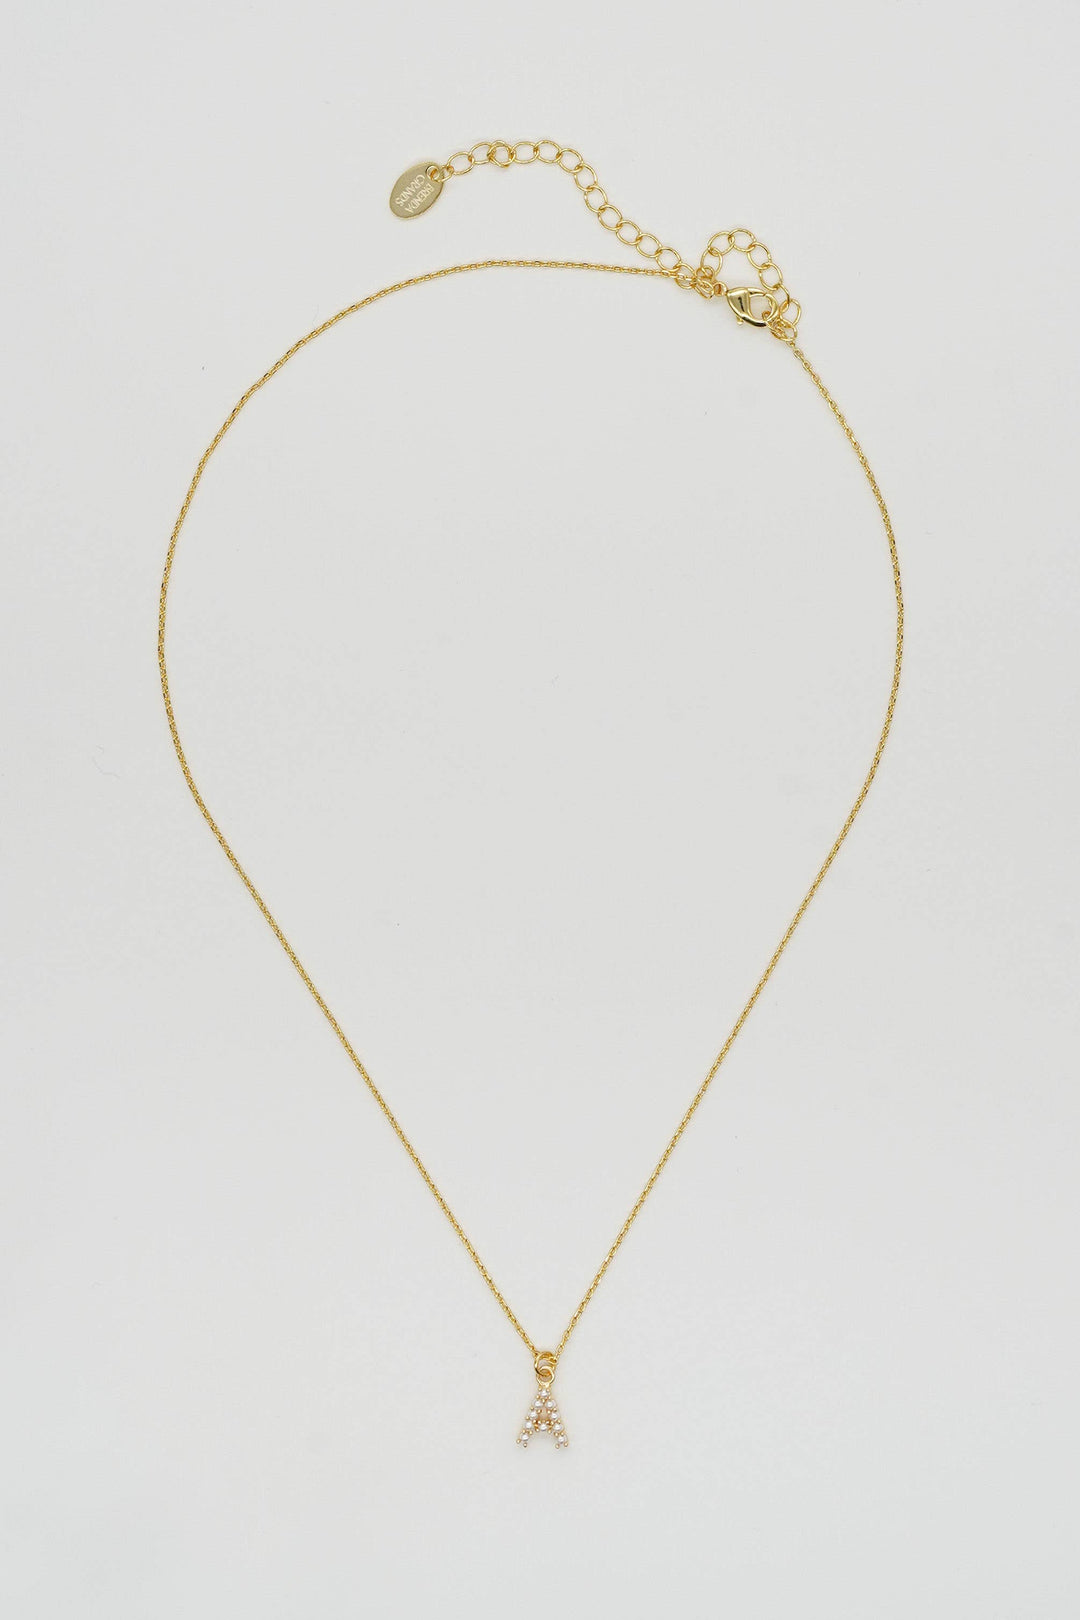 Dainty Love Pearl Initial Necklace: Holiday Favorite: A/ 15"+3"